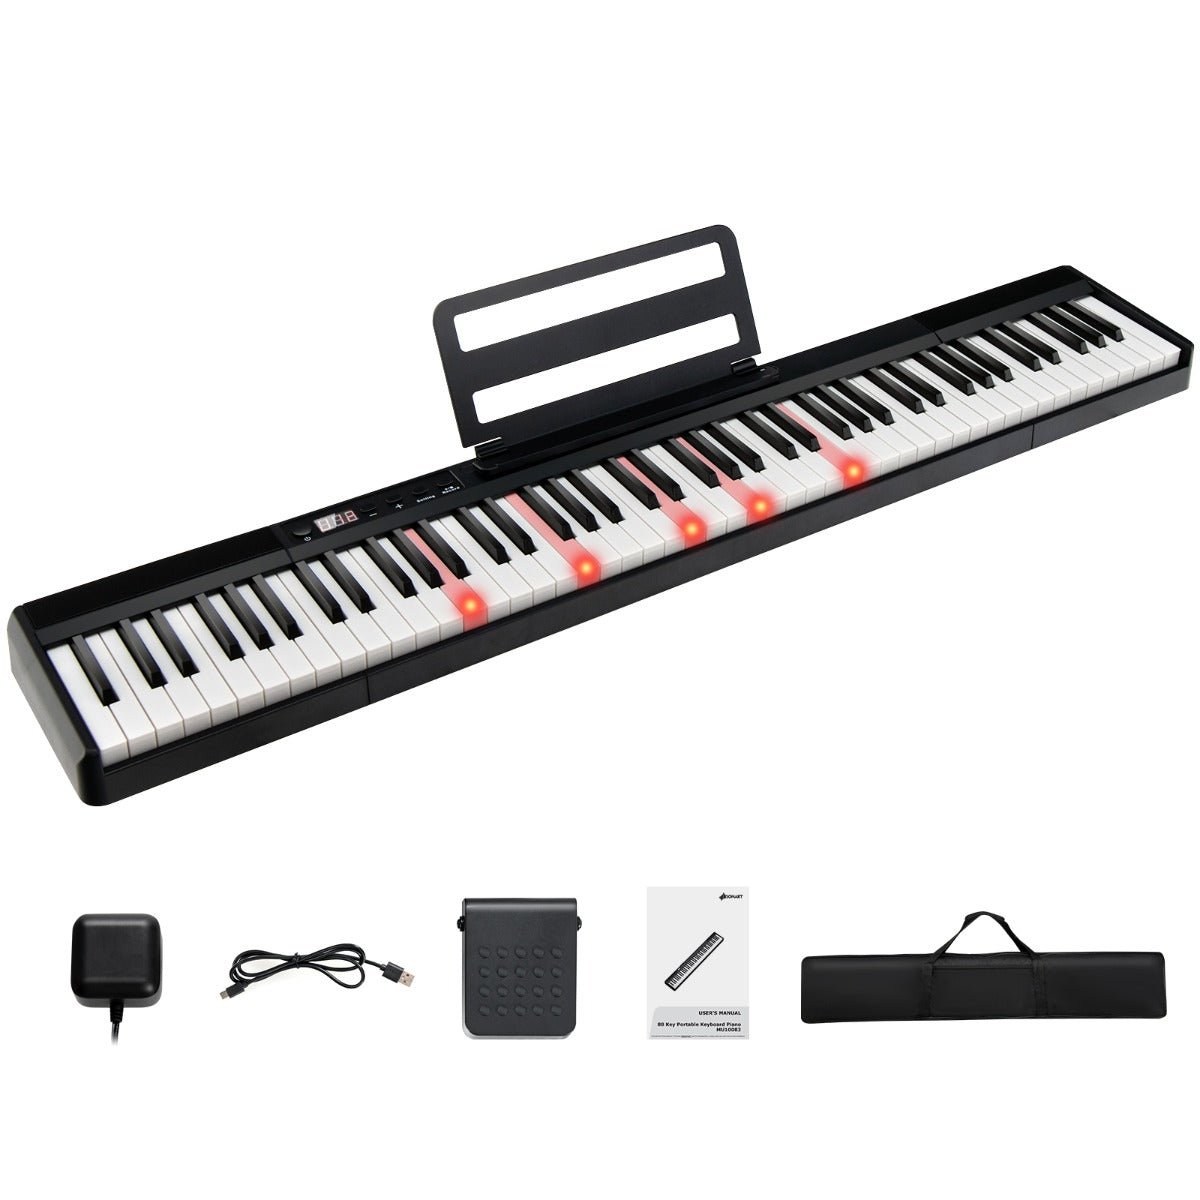 Lighted Electric Piano Keyboard - Illuminate Your Musical Journey